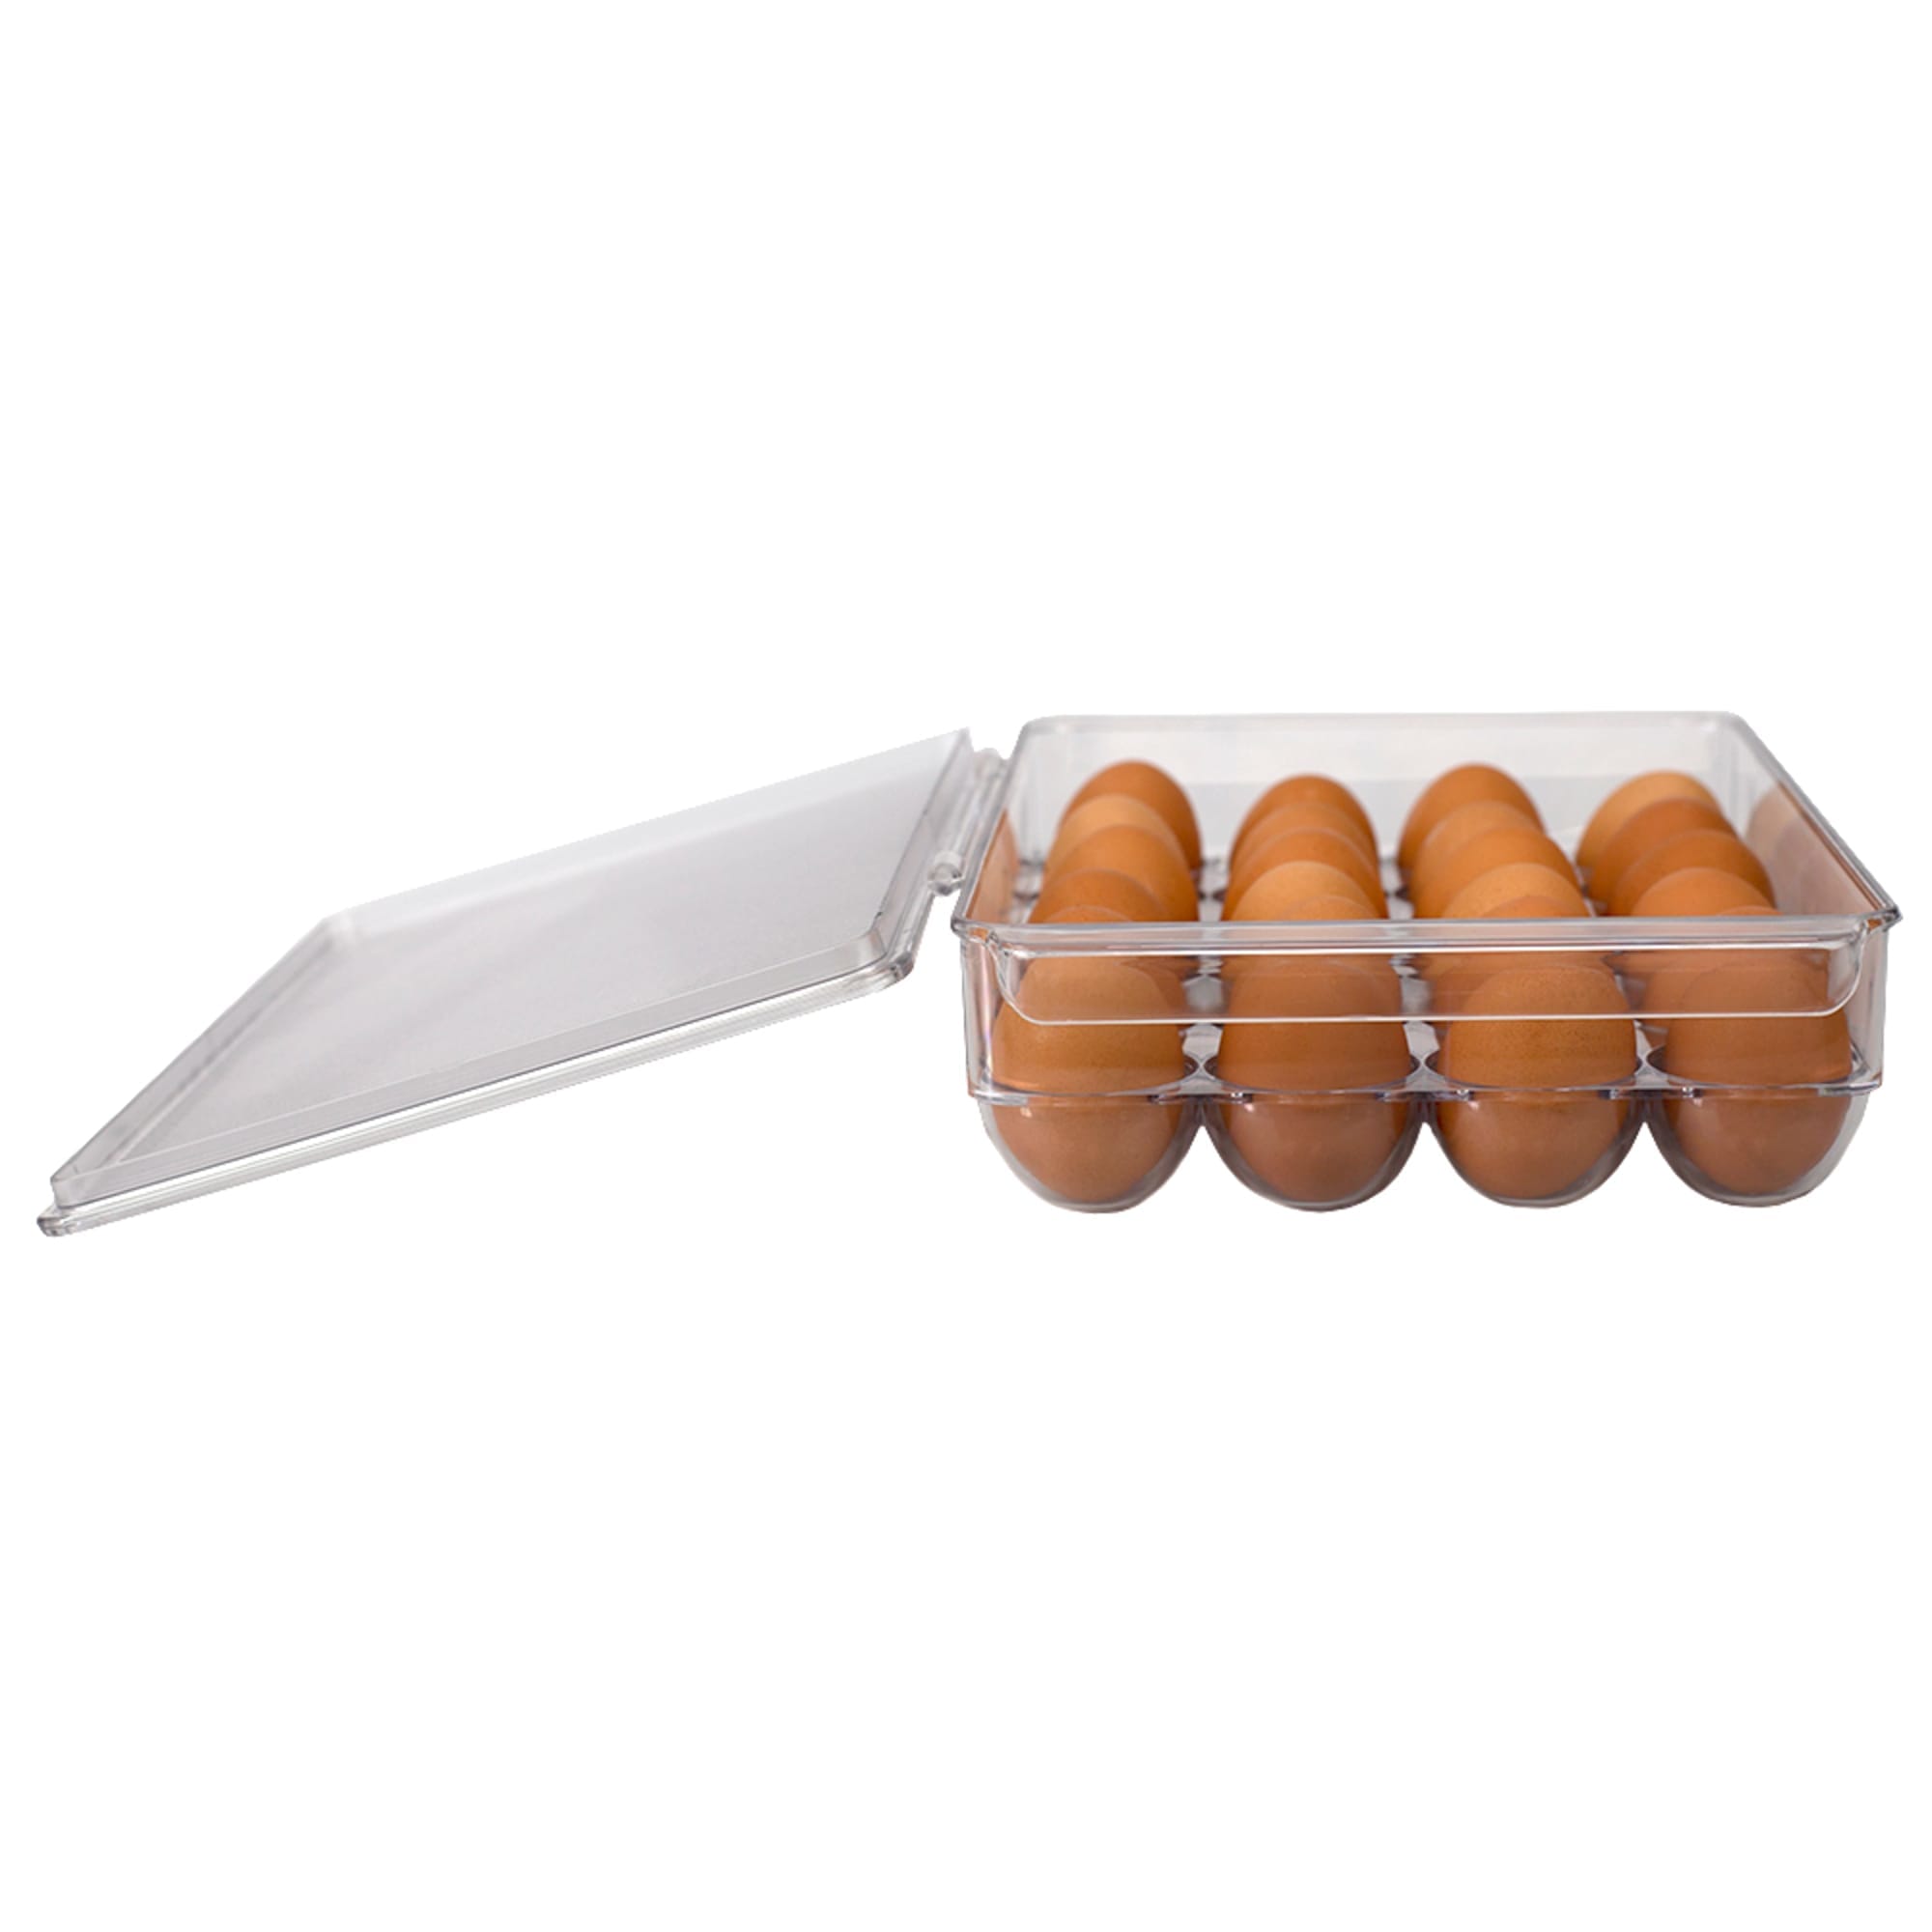 Michael Graves Design Stackable 24 Compartment Plastic Egg Container with  Lid, Clear, KITCHEN ORGANIZATION